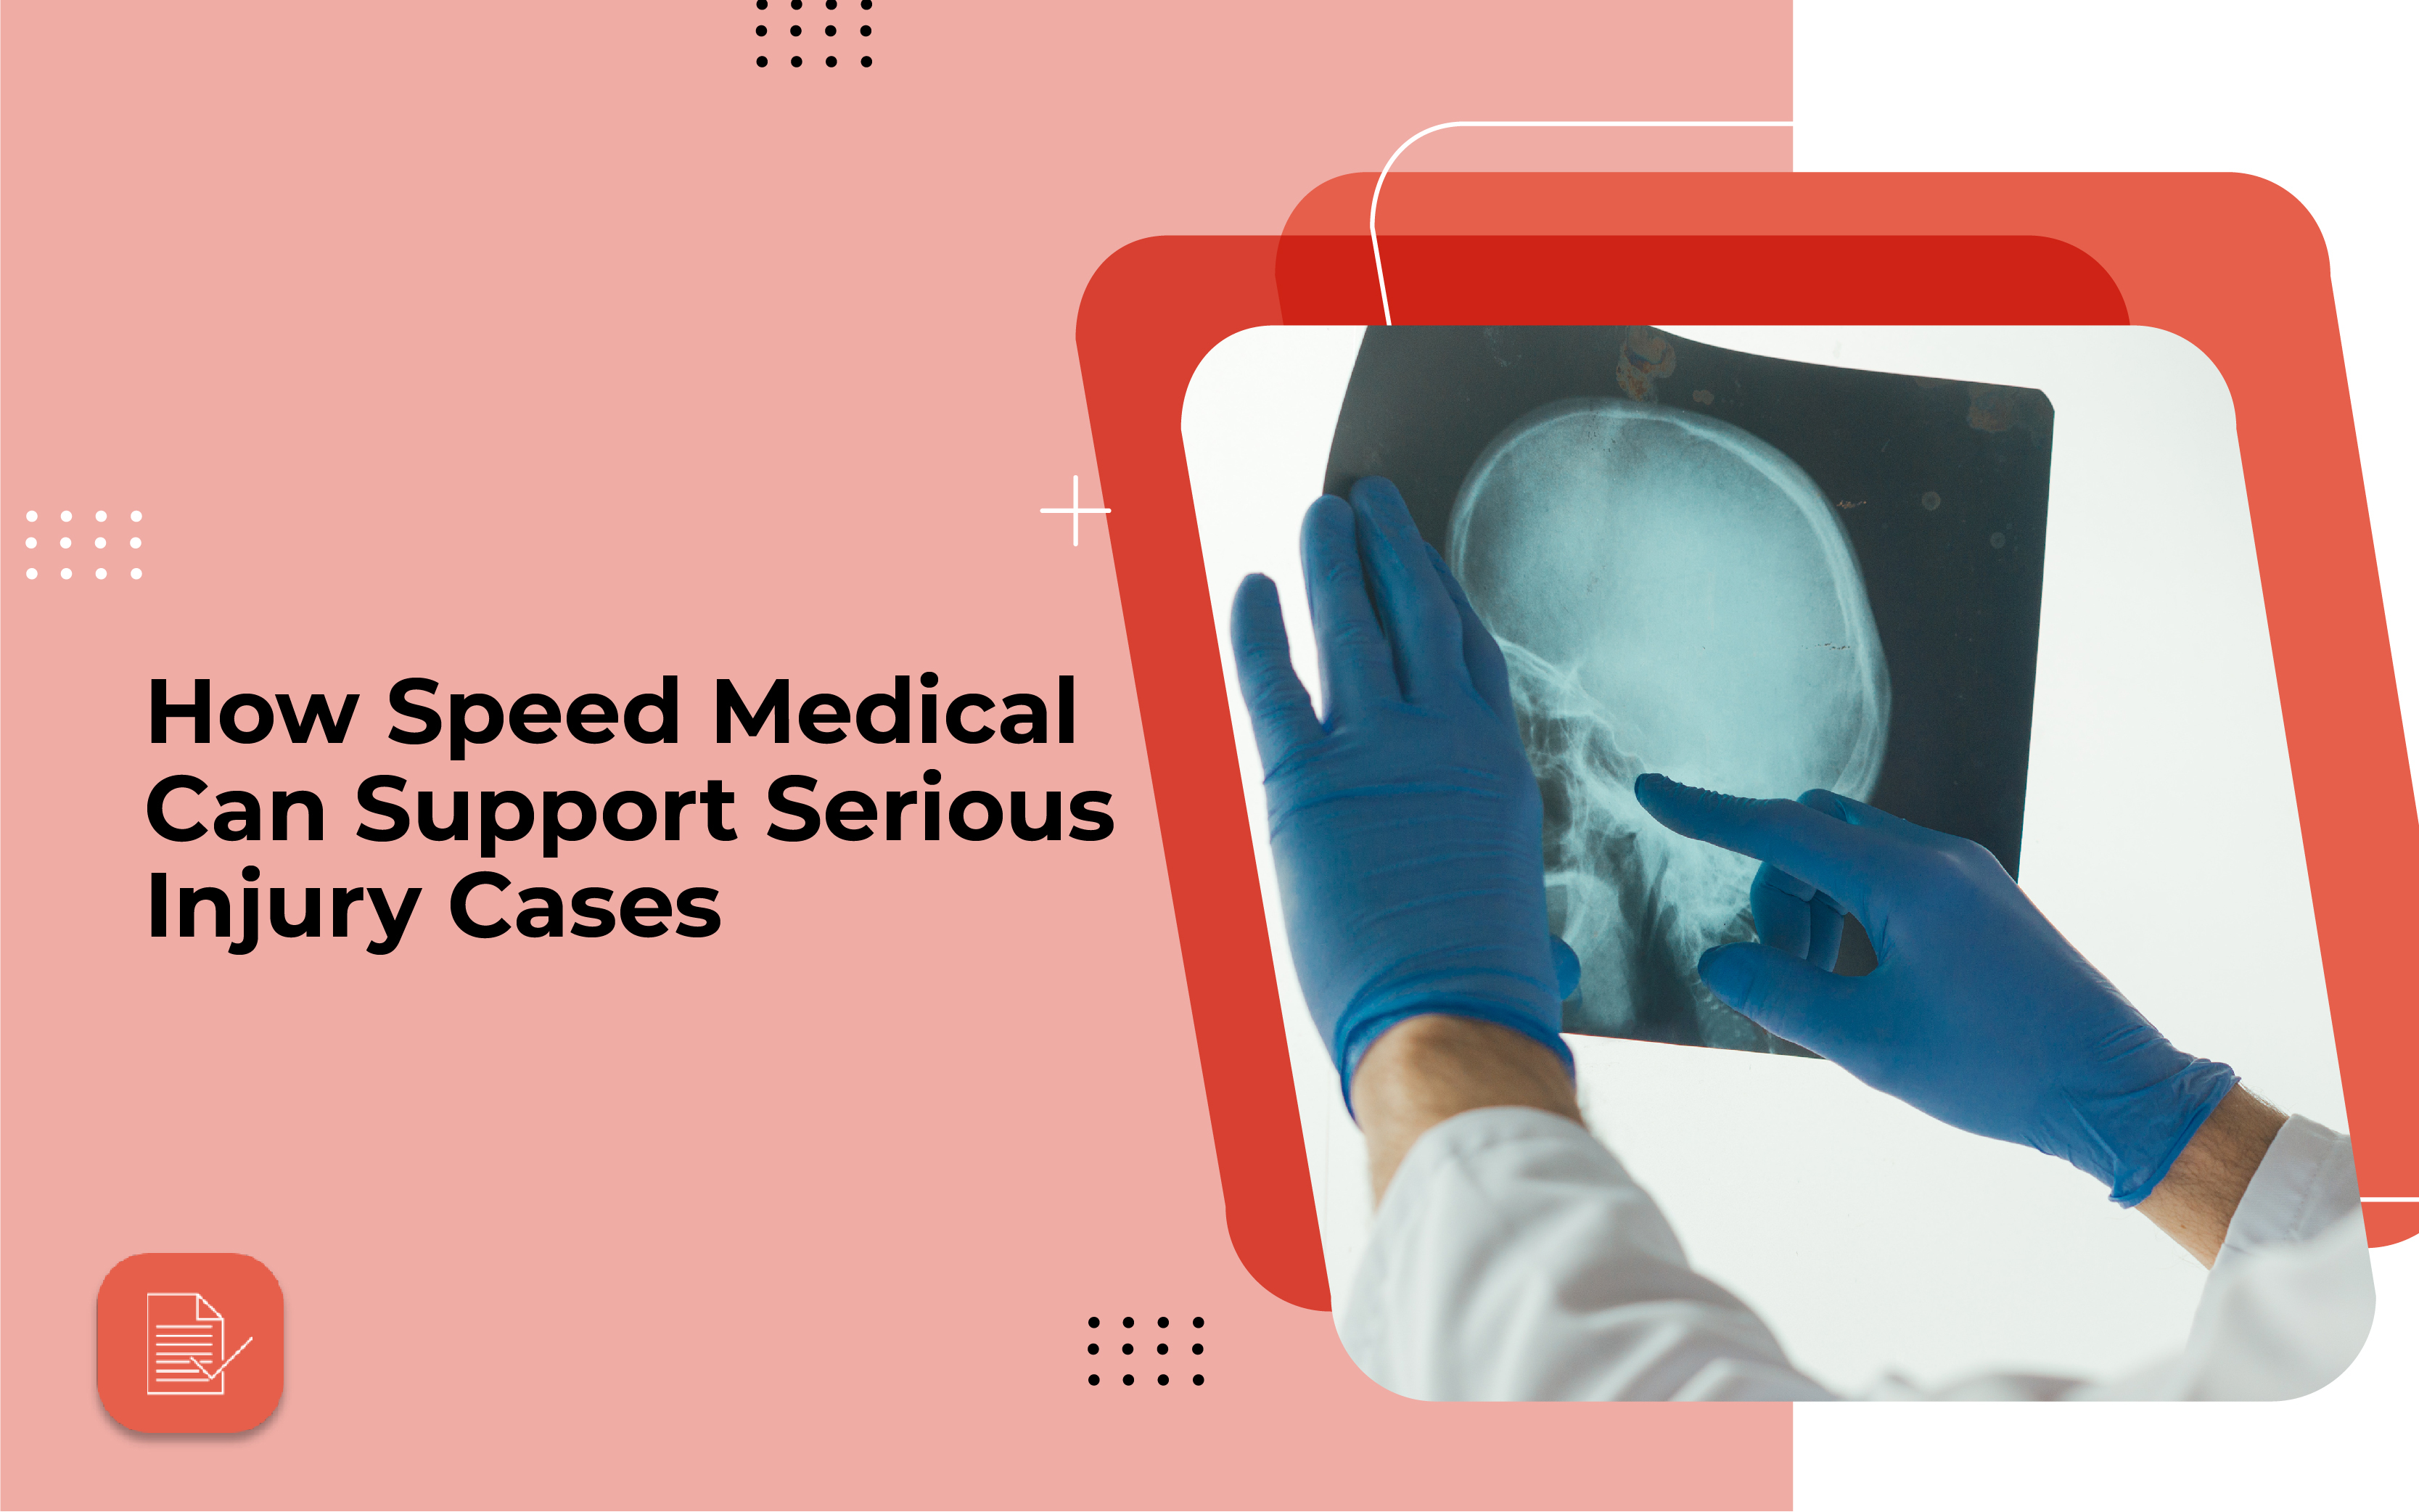 How Speed Medical Can Support Serious Injury Cases